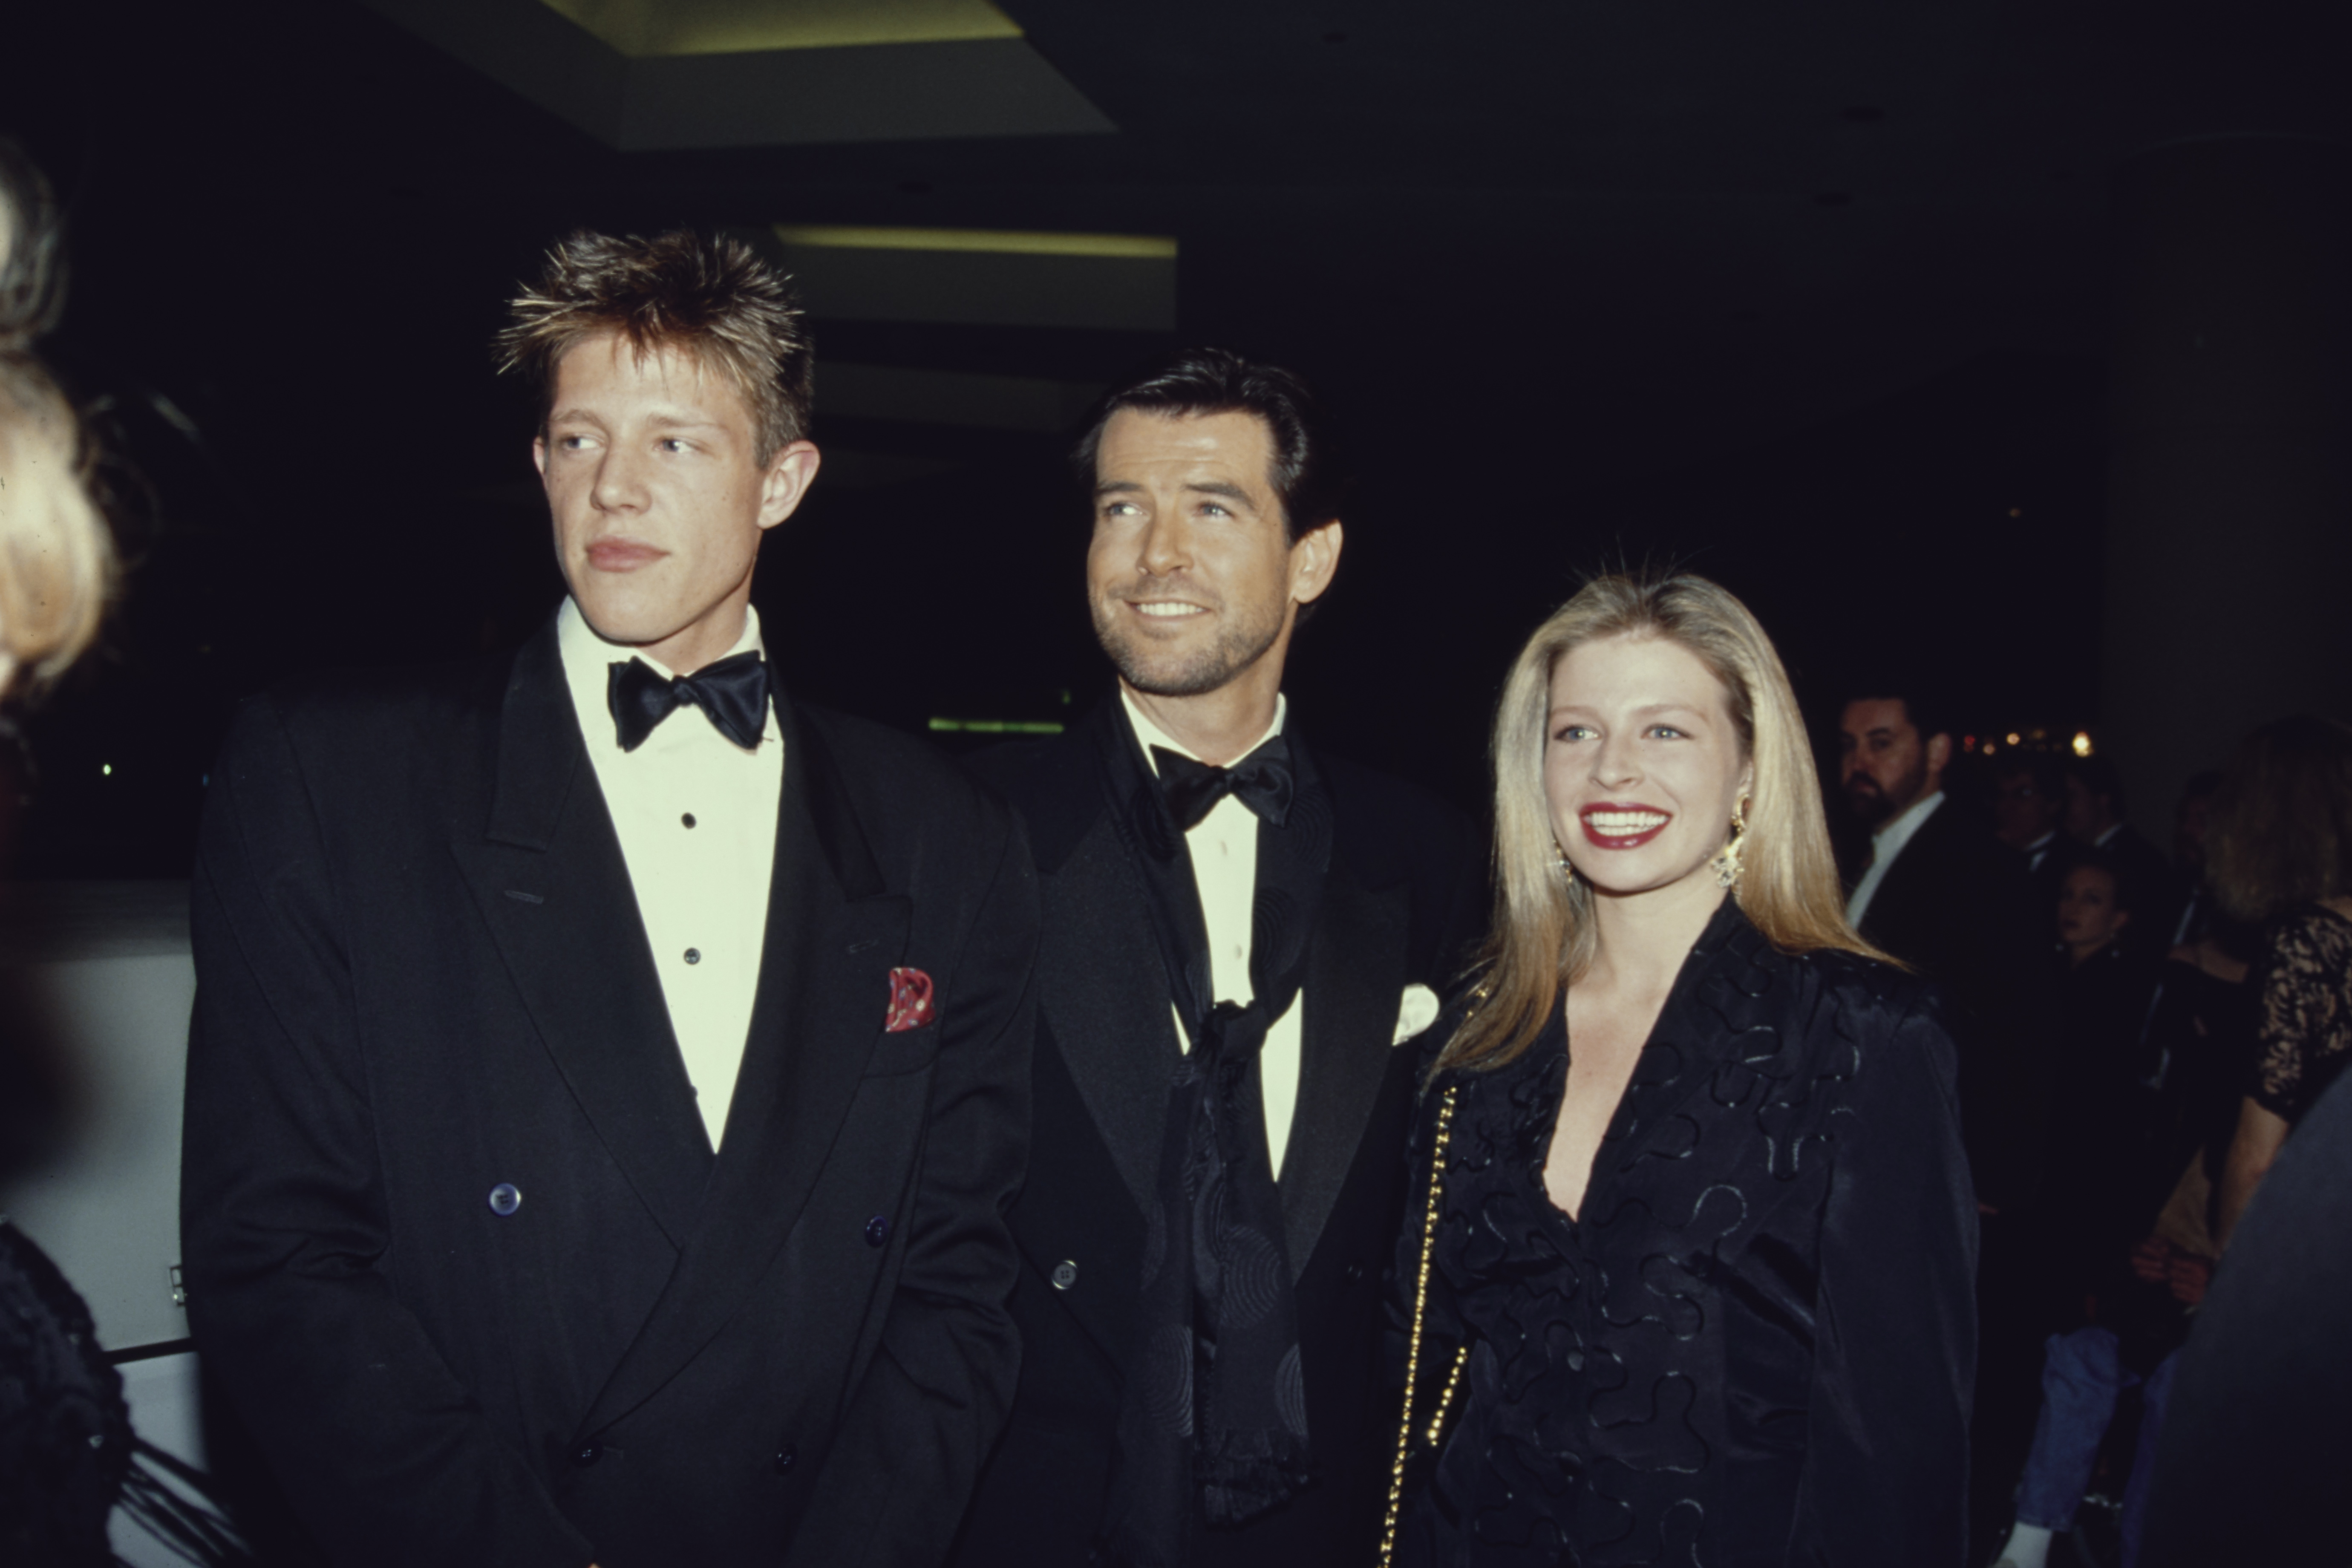 Christopher Brosnan, Pierce Brosnan and Charlotte Brosnan at the 49th Annual Golden Globe Awards at the Beverly Hilton Hotel on January 18 1992 in Beverly Hills, California. | Source: Getty Images